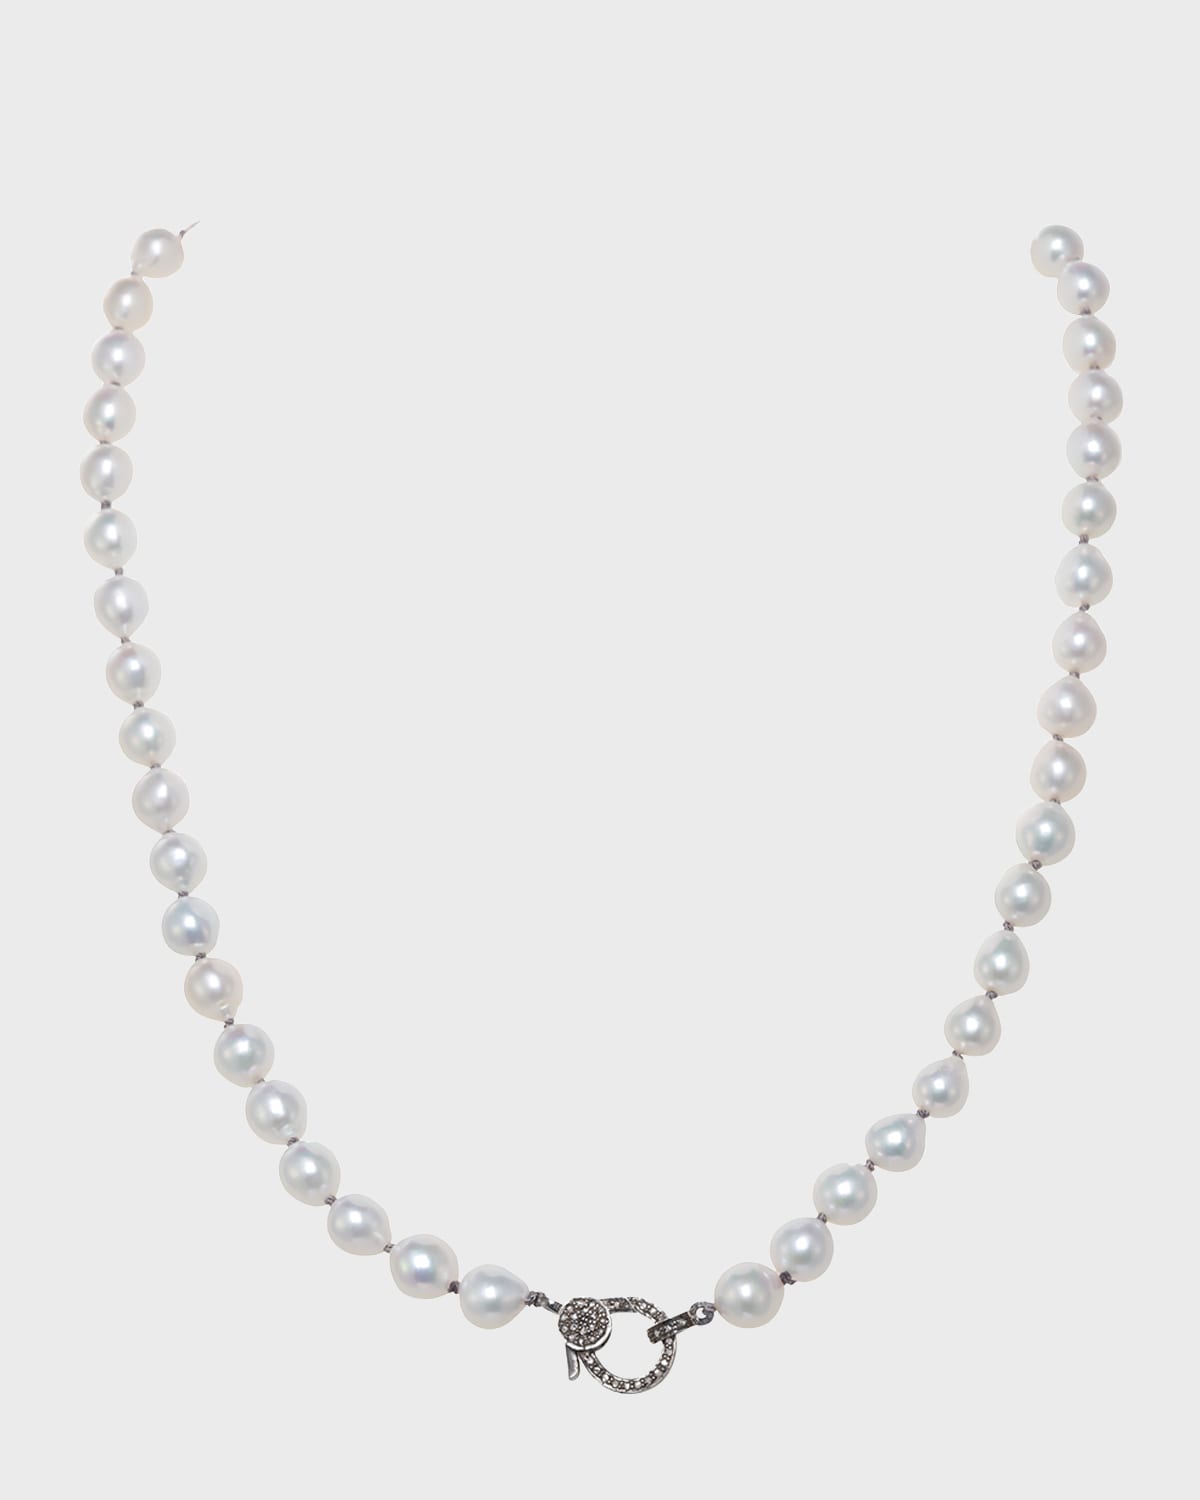 Margo Morrison Petite Baroque Pearl Necklace With Diamond Clasp, 7-8mm, 16"l In White